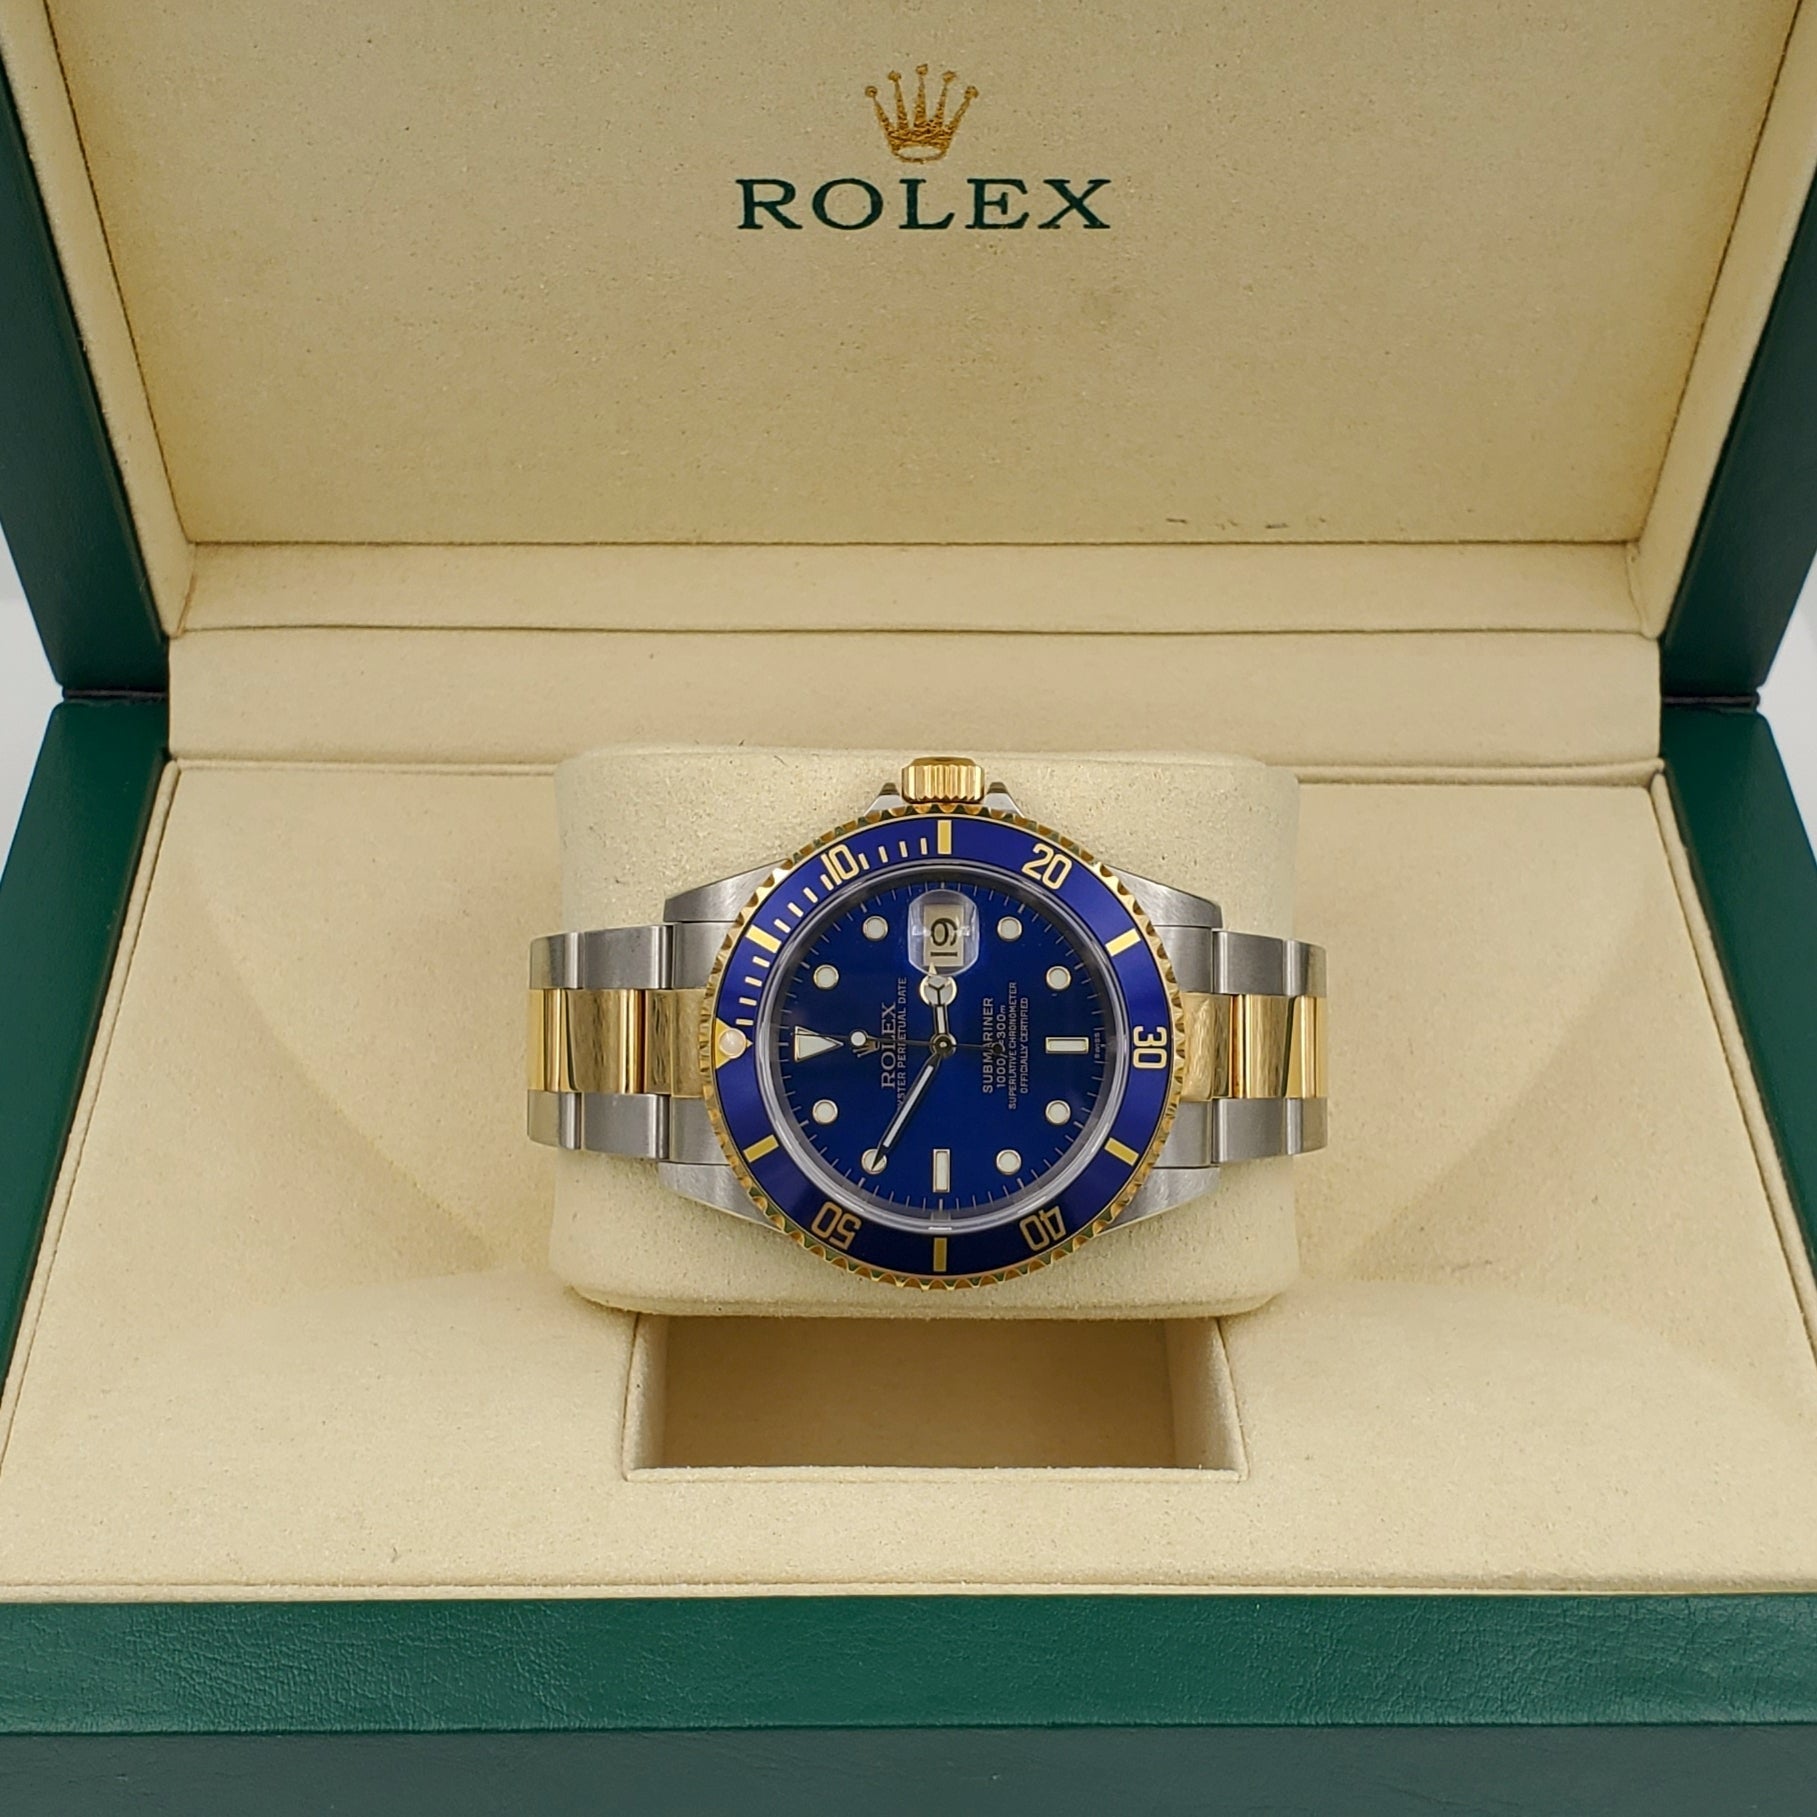 2004 Men's Rolex 40mm Submariner Oyster Perpetual Two Tone 18K Yellow Gold / Stainless Steel Watch with Blue Dial and Blue Bezel. (Pre-Owned 16613)